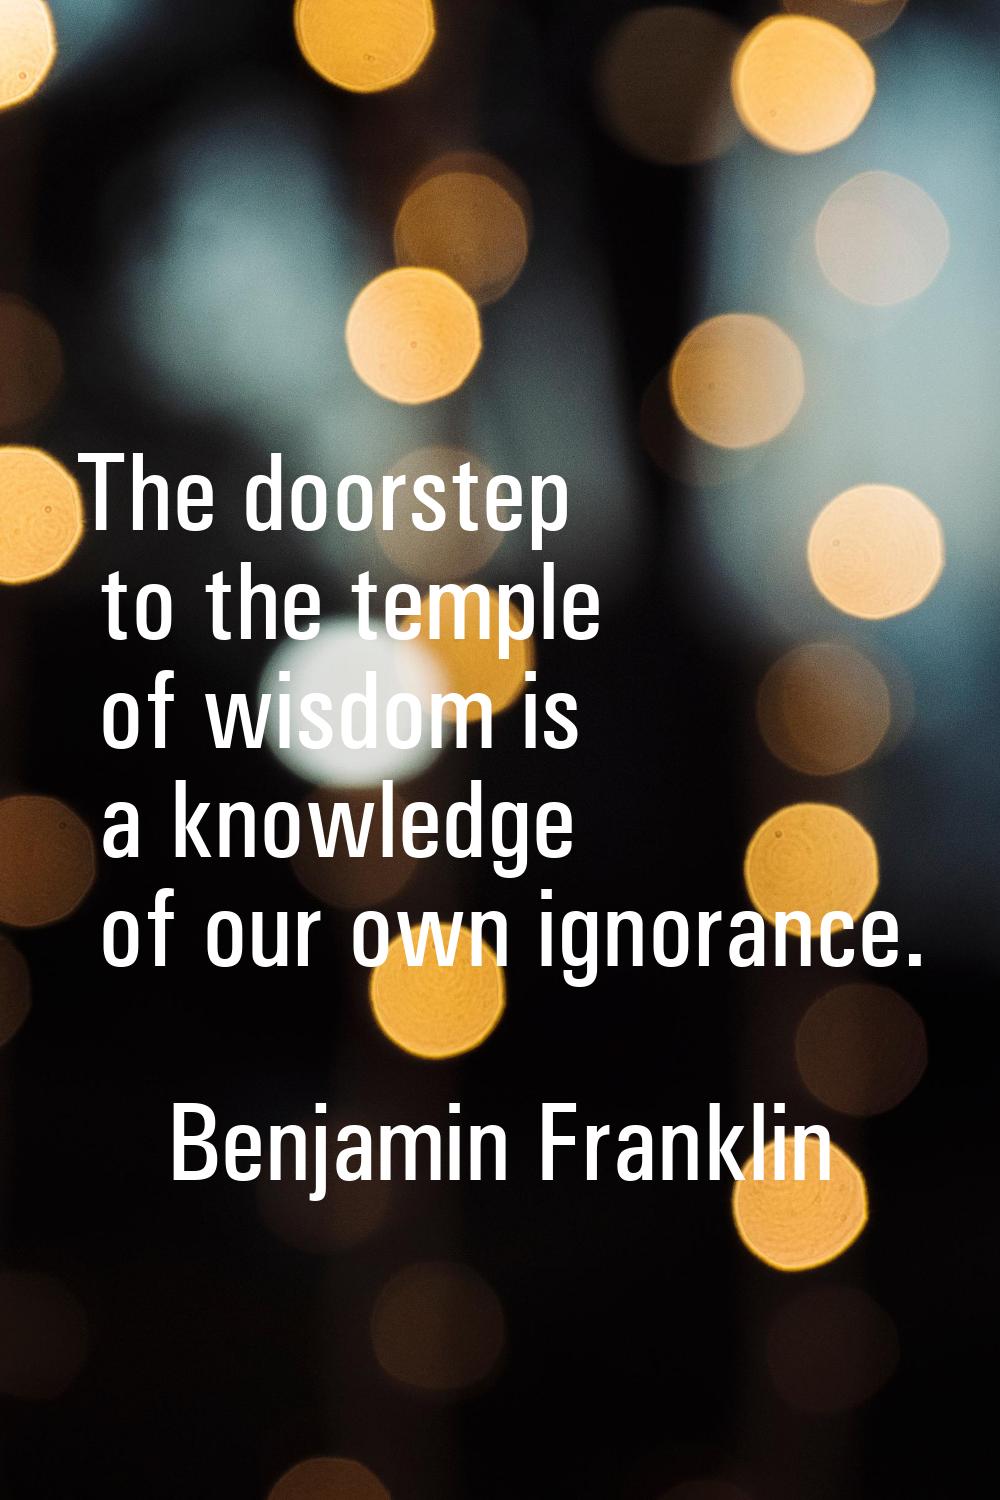 The doorstep to the temple of wisdom is a knowledge of our own ignorance.